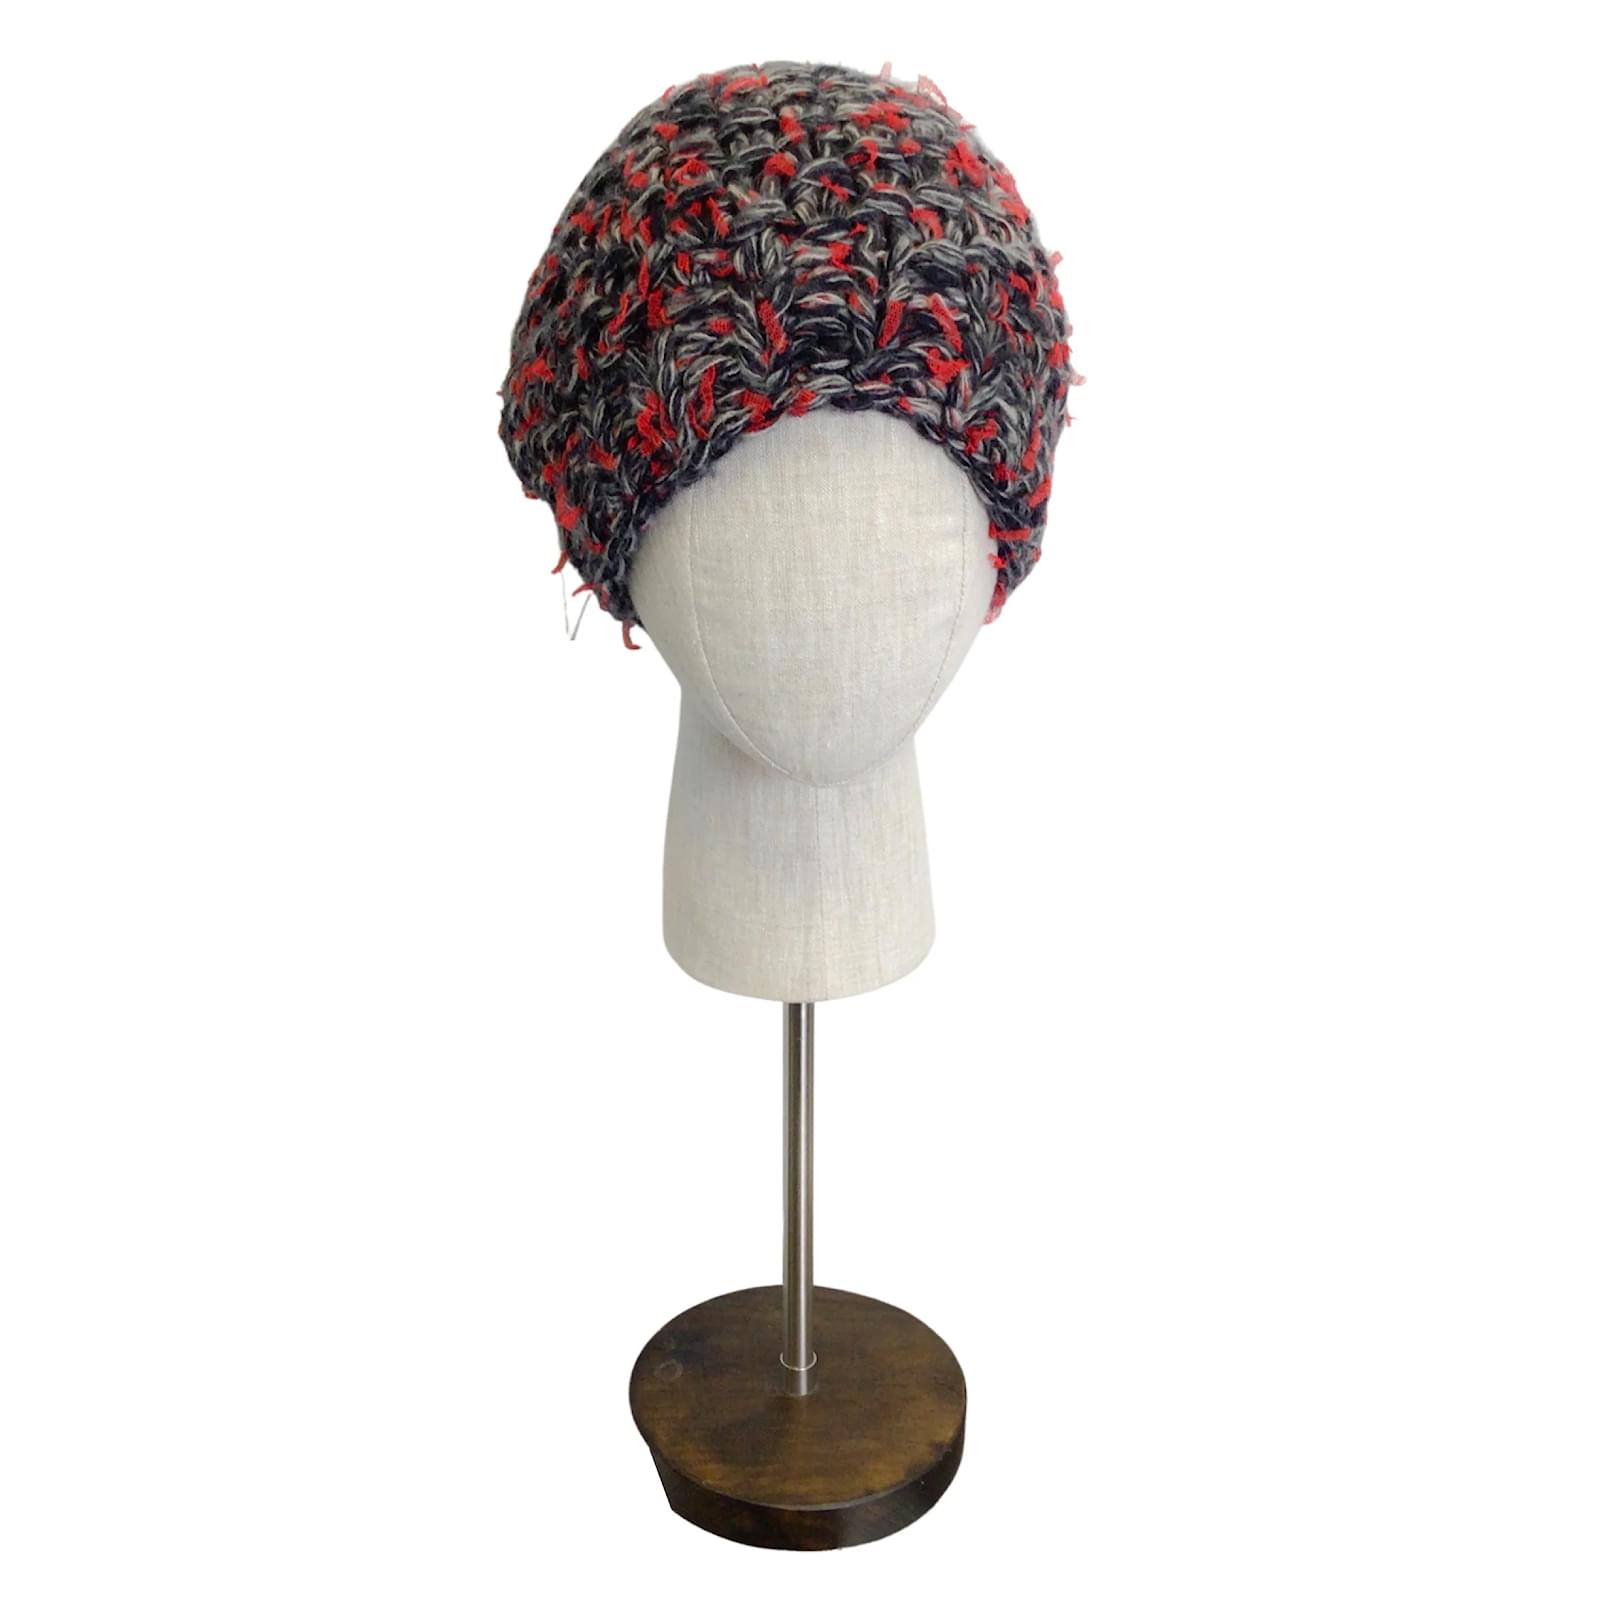 Hats Chanel Chanel Red / Grey / Black Woven Cashmere and Silk Chunky Knit Pom Pom Beanie / Hat